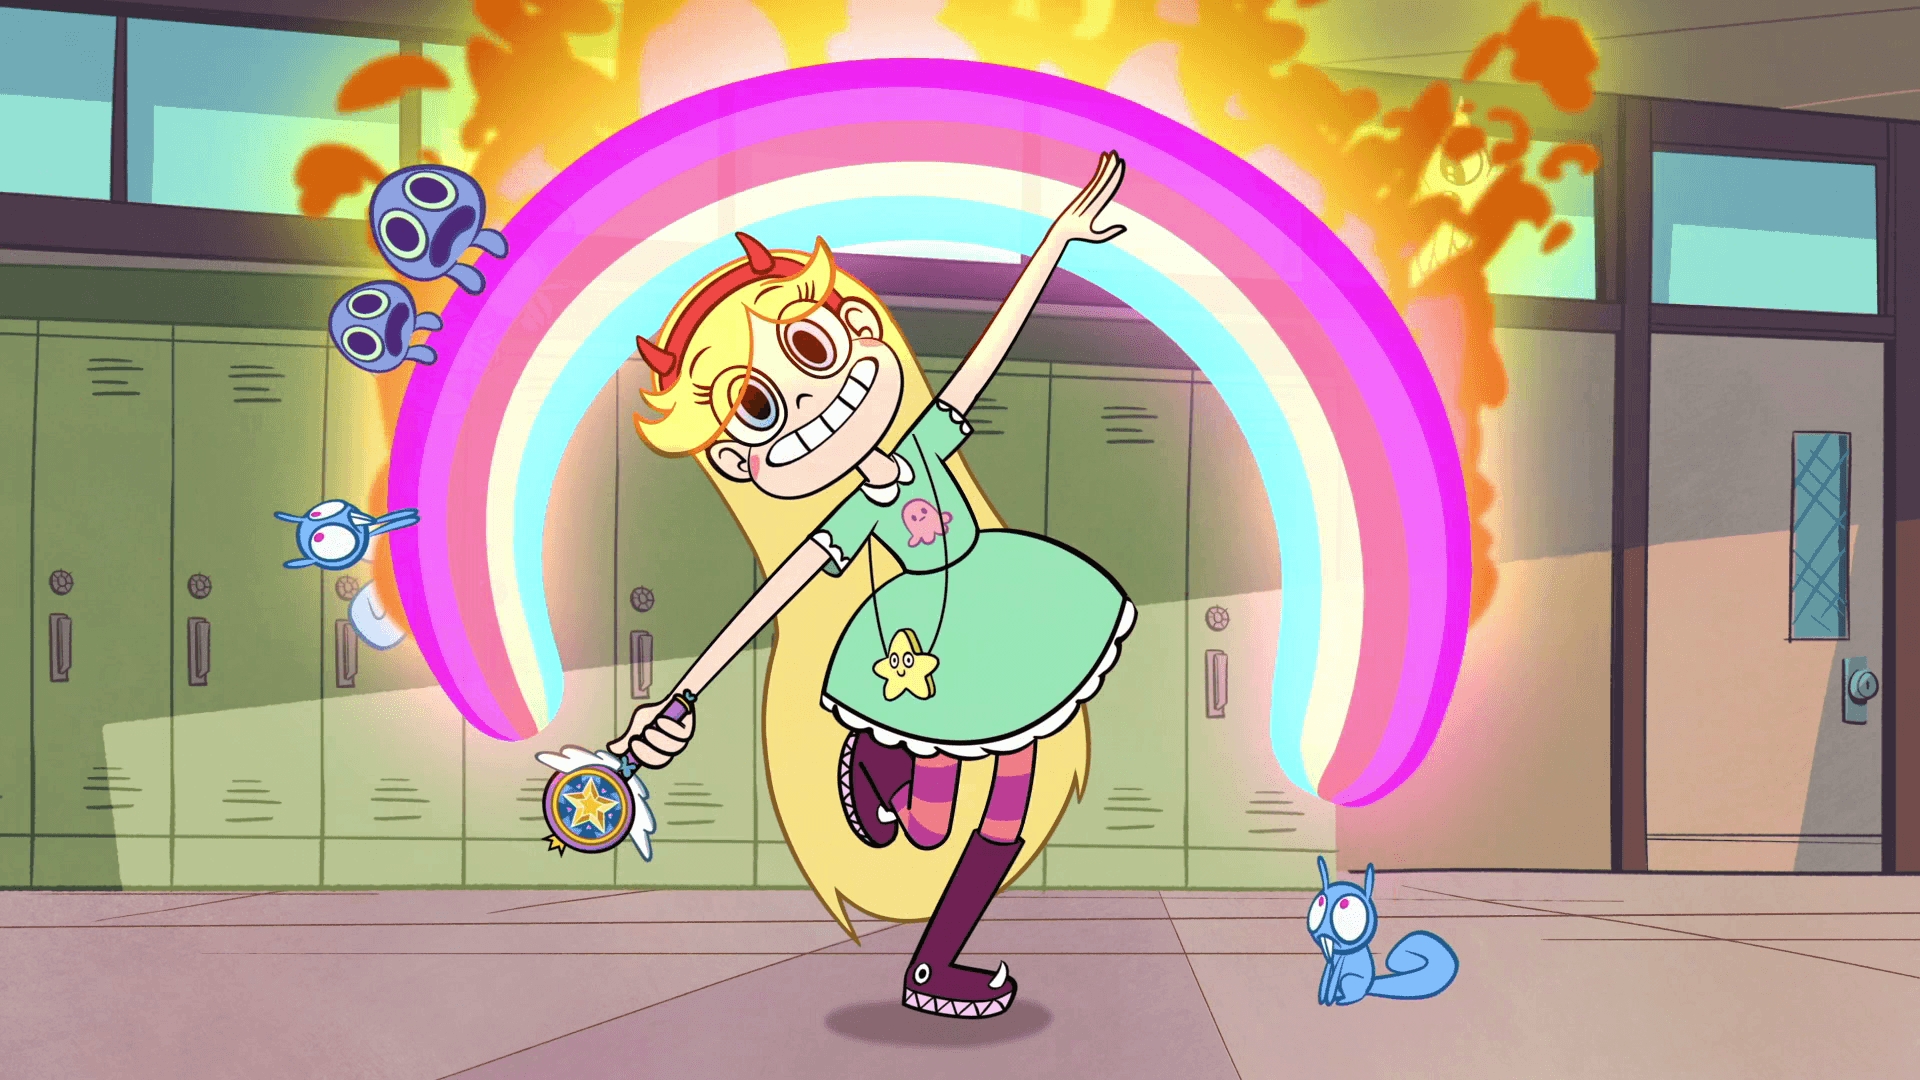 10 New Star Vs The Forces Of Evil Wallpaper FULL HD 1080p For PC Background